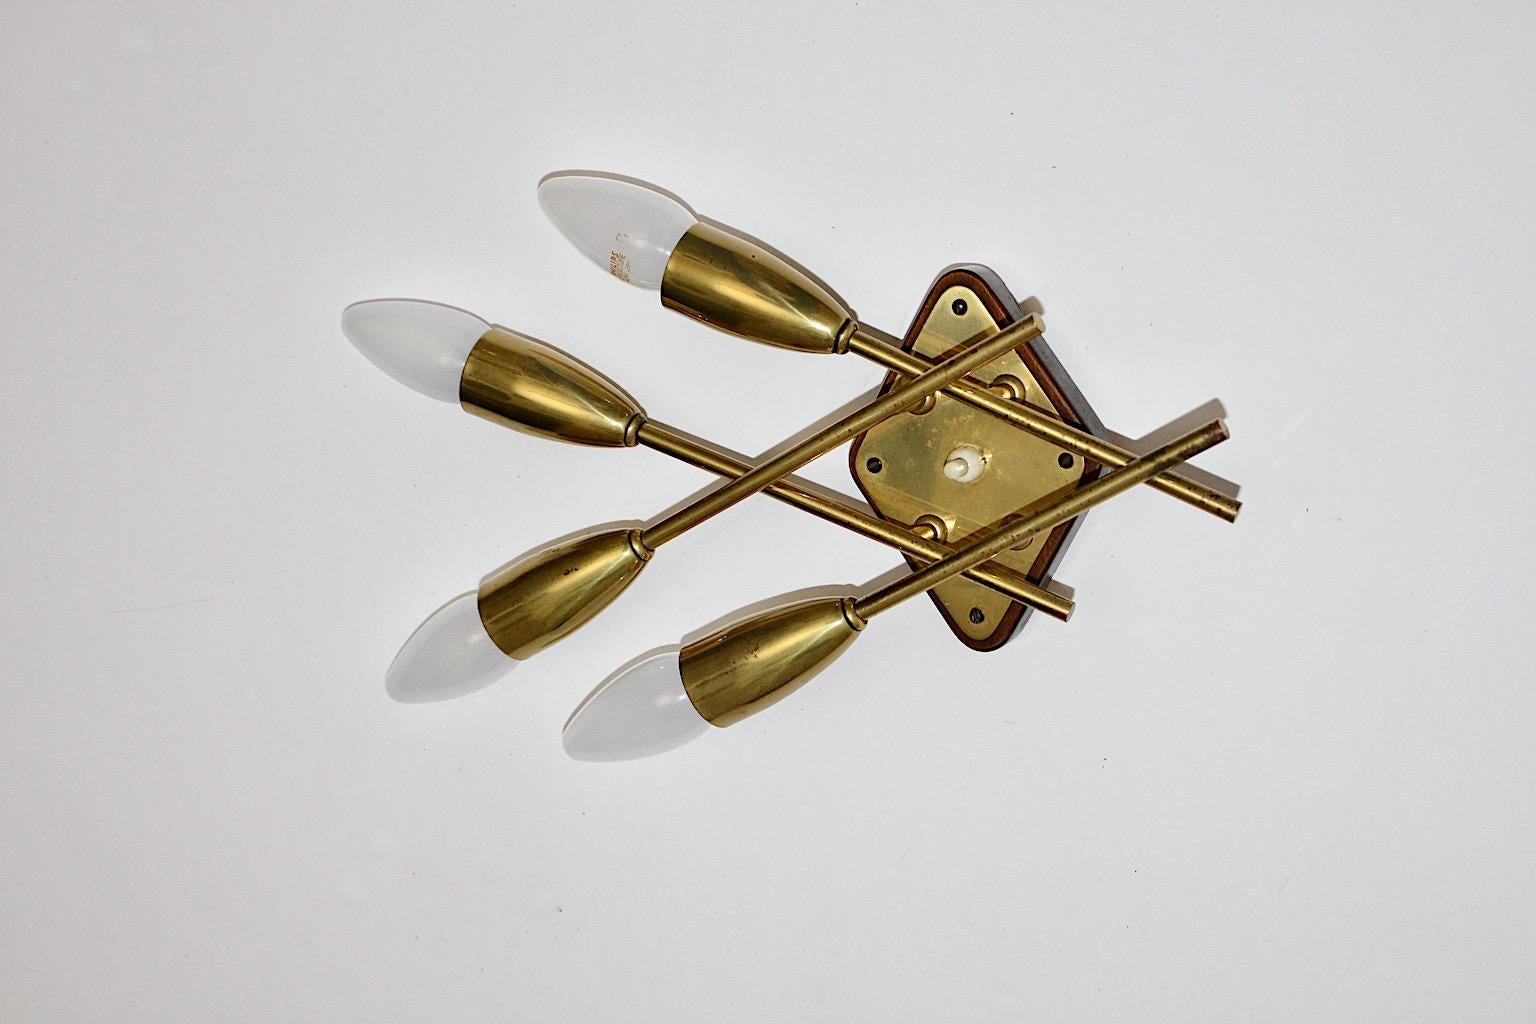 Brass sconce or wall light by Rupert Nikoll, which was designed and manufactured 1950s Vienna, Austria.
A beech base in contrast with 4 brass constructed E 14 sockets forms a beautiful sconce from the Mid-Century Modern era
and results in an